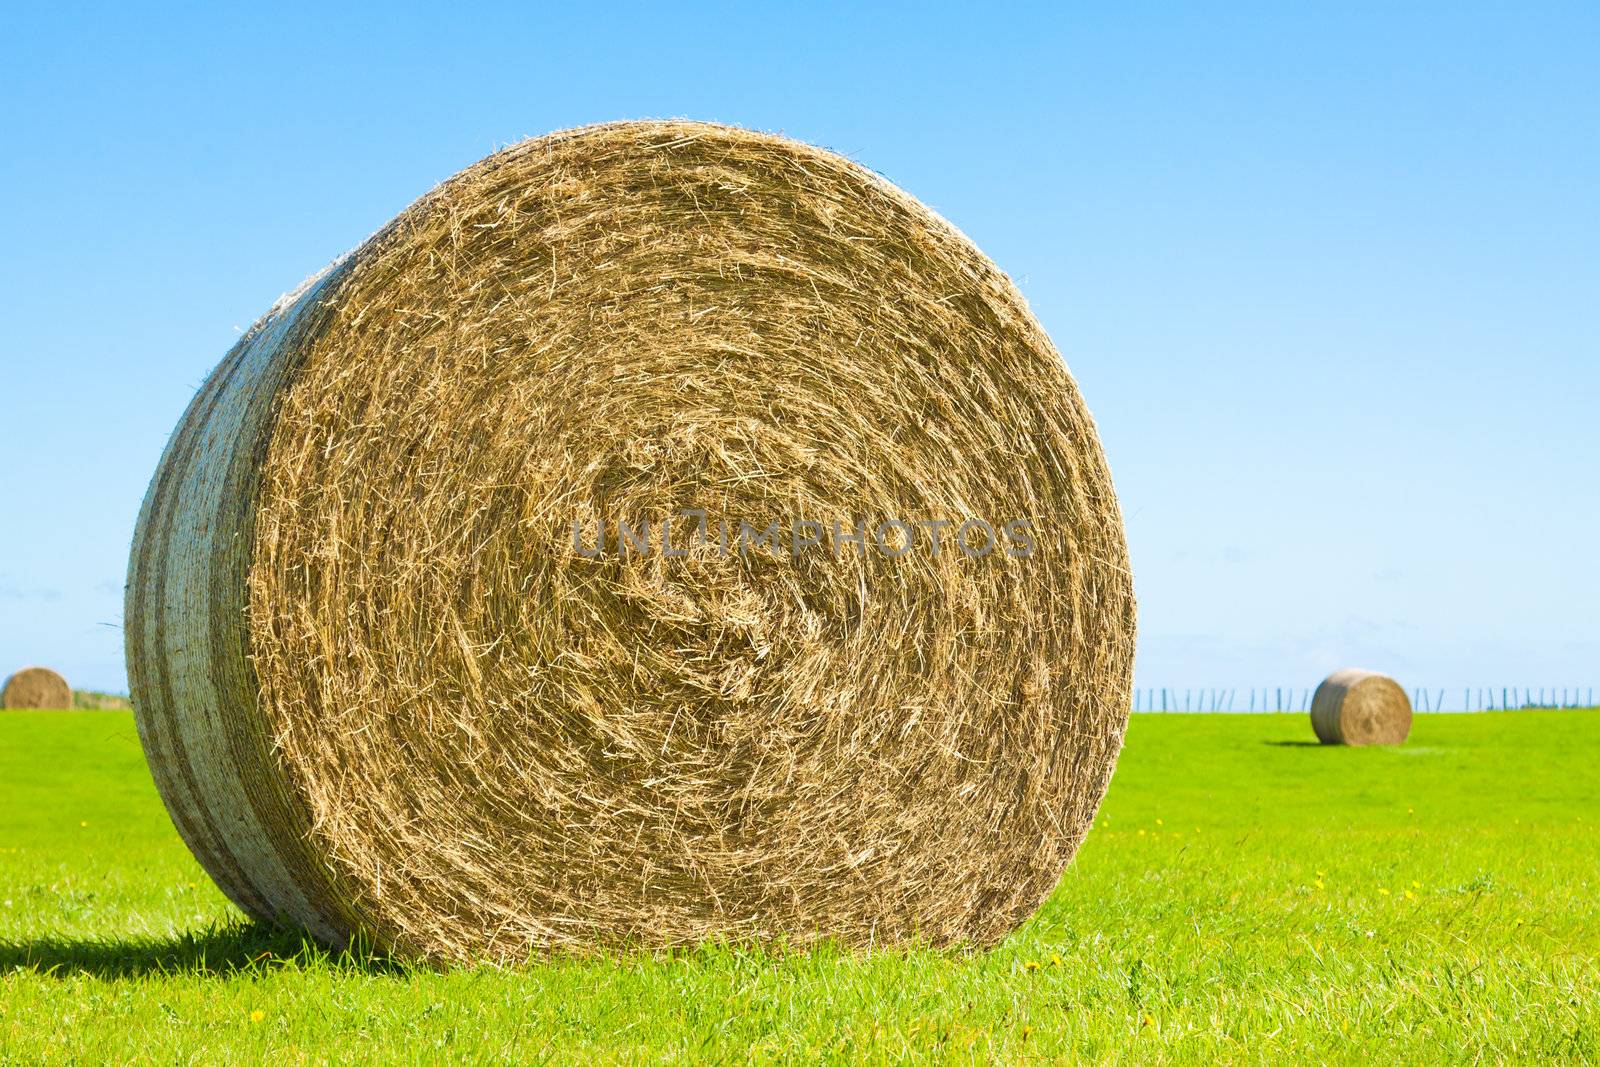 Close-up of a big round hay bale roll in a green field